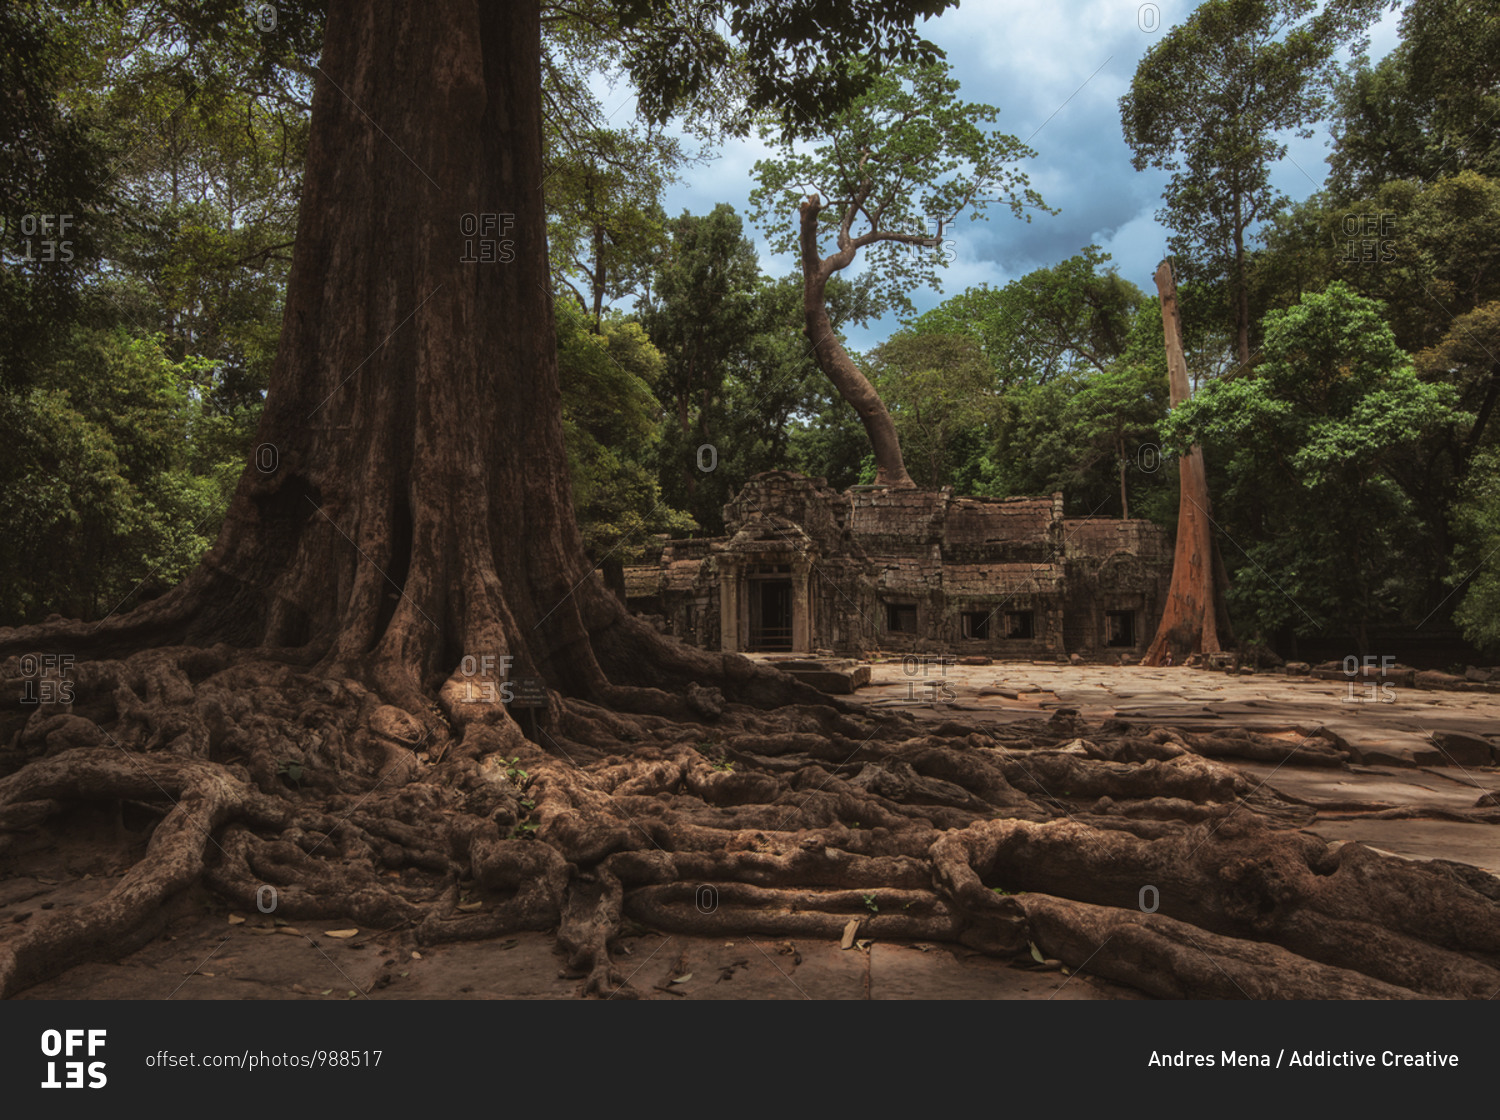 Low angle of wonderful scenery of aged Buddhist temple covered with huge tree roots and located in jungles in Cambodia